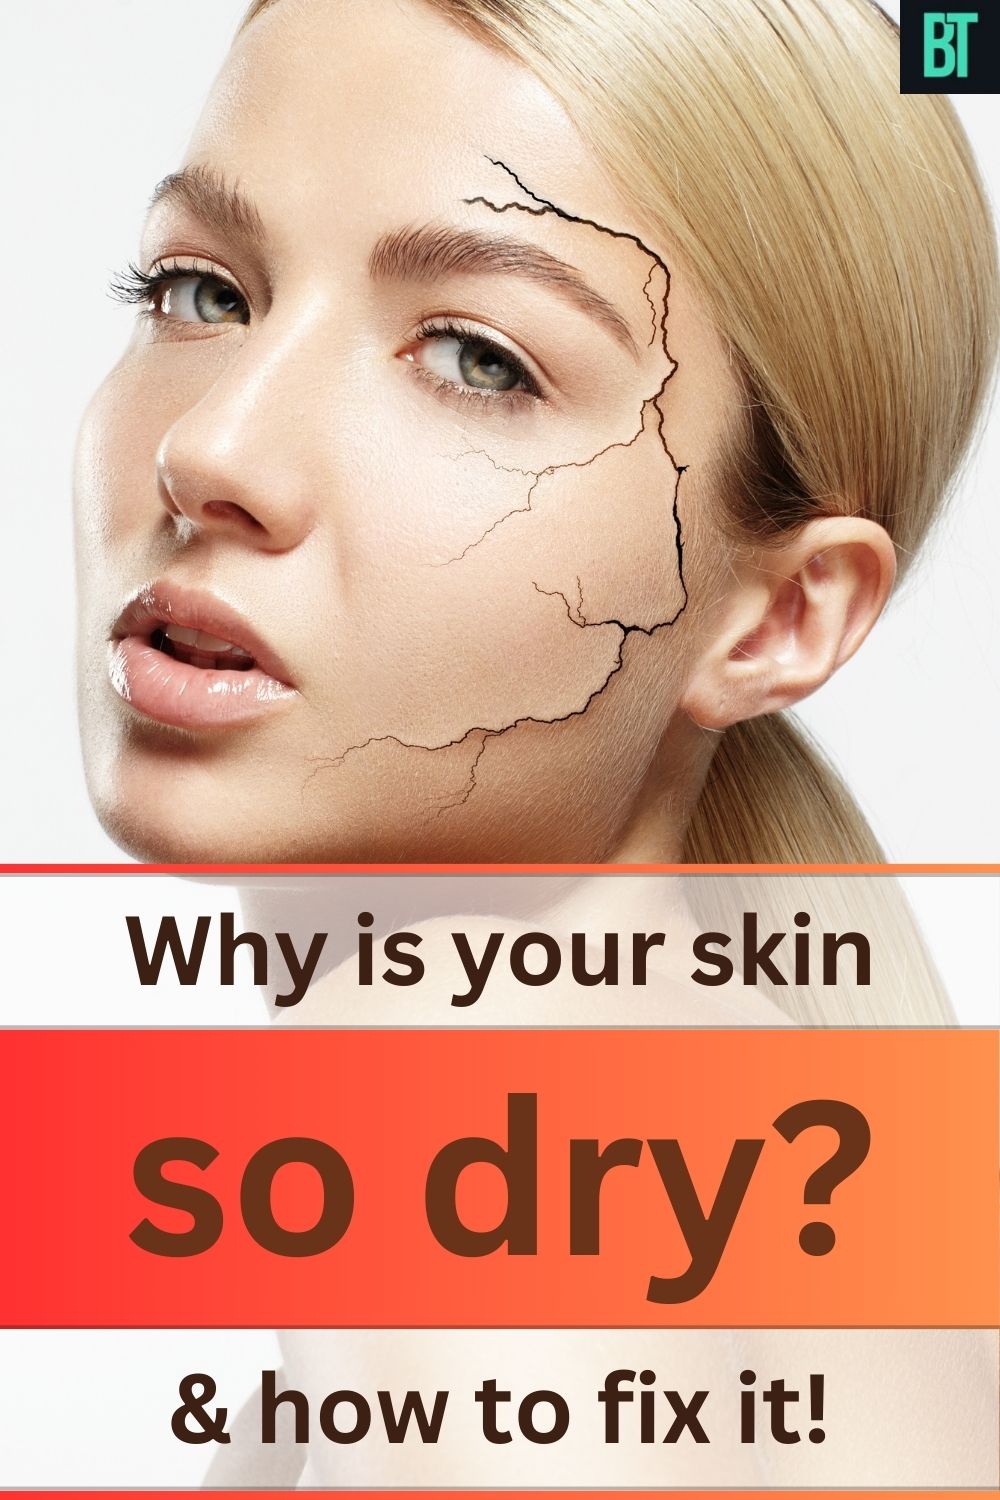 Why is your skin so dry? How to Fix it!